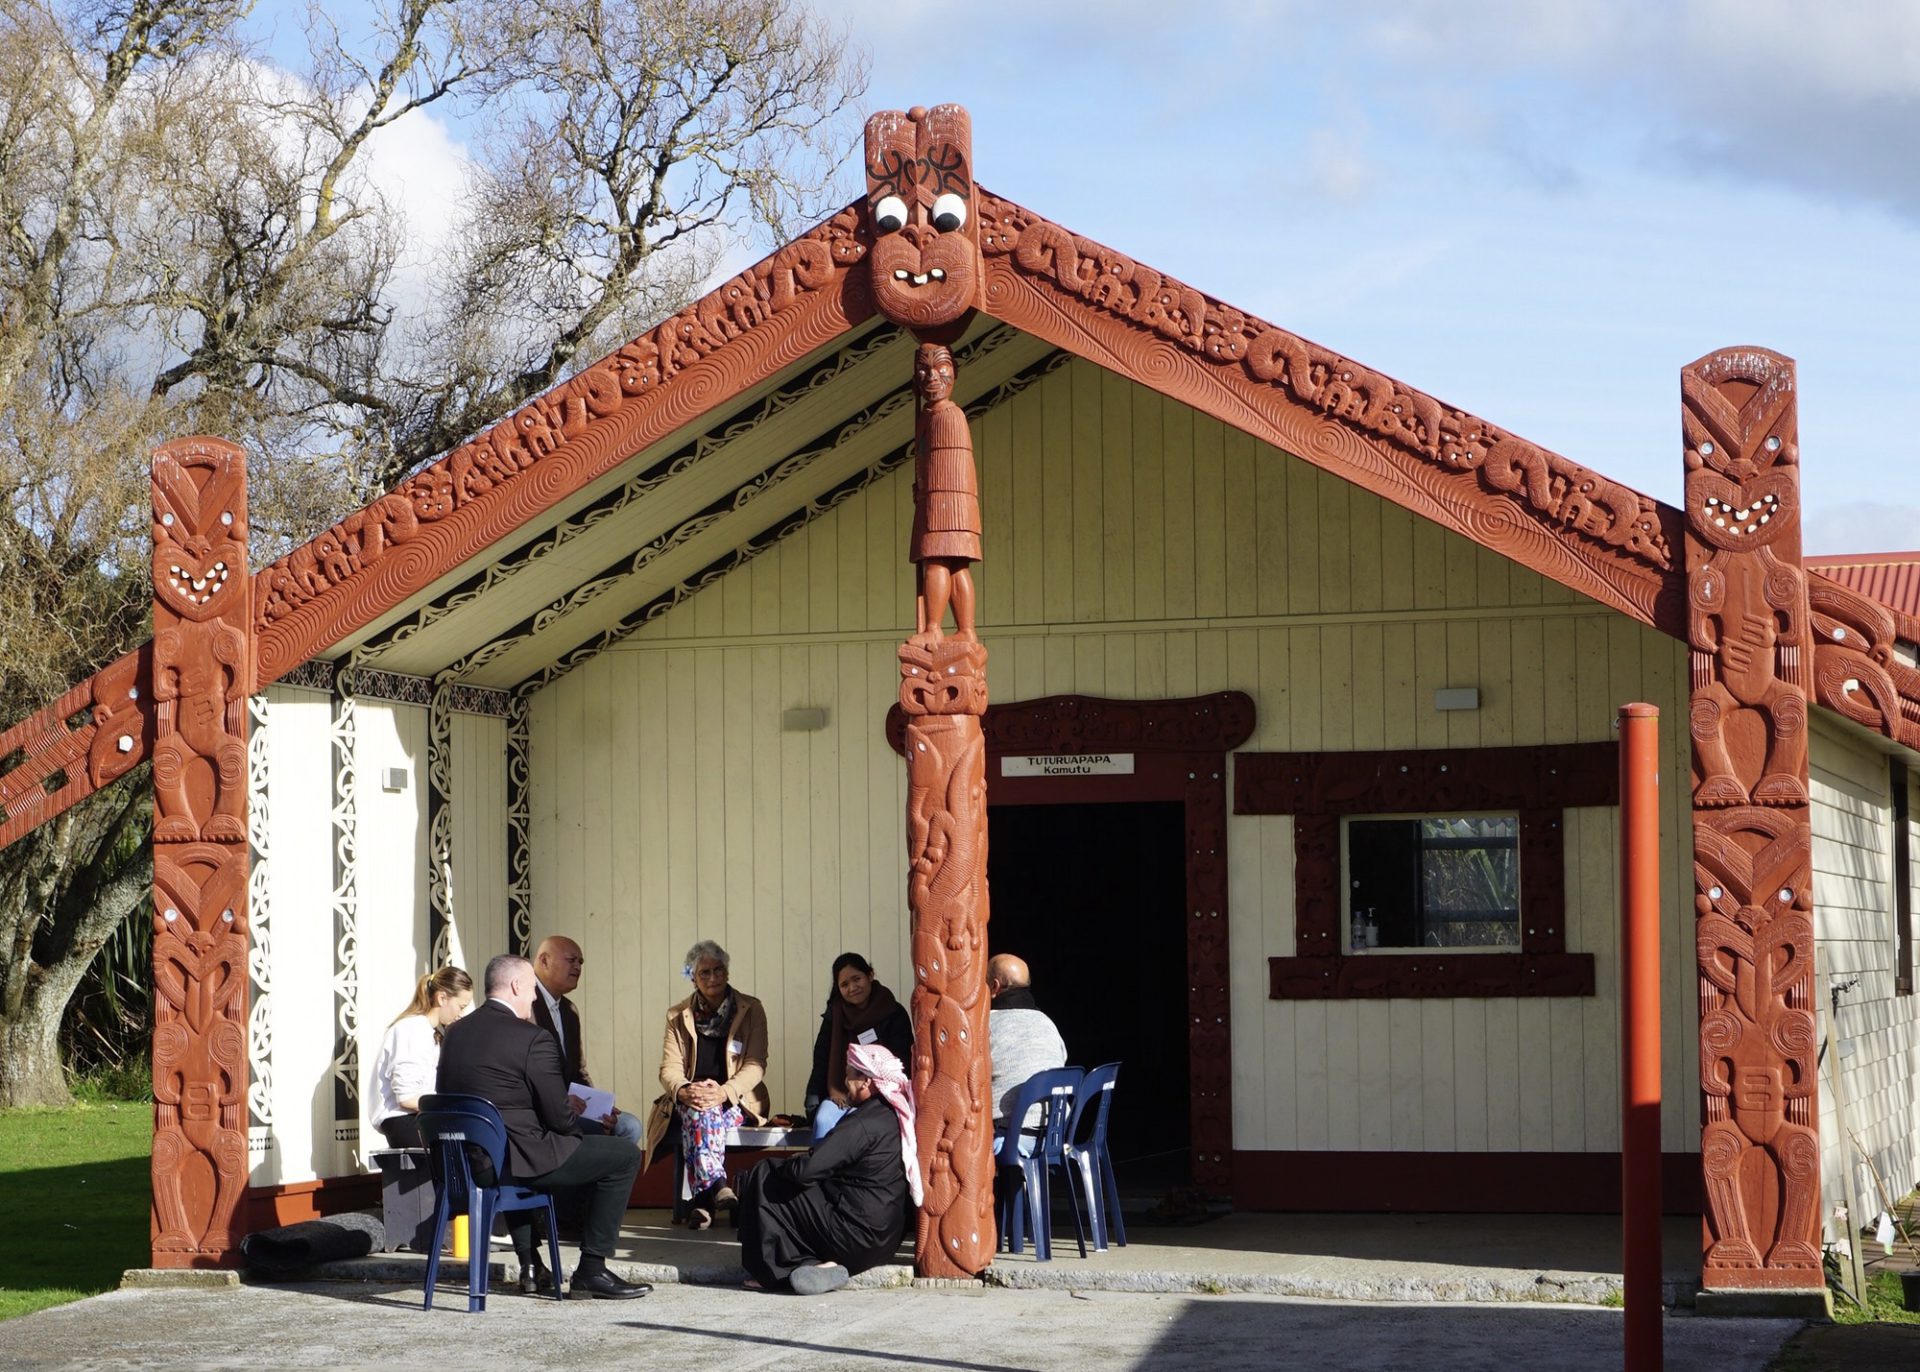 Group sitting in front of marae in discussion